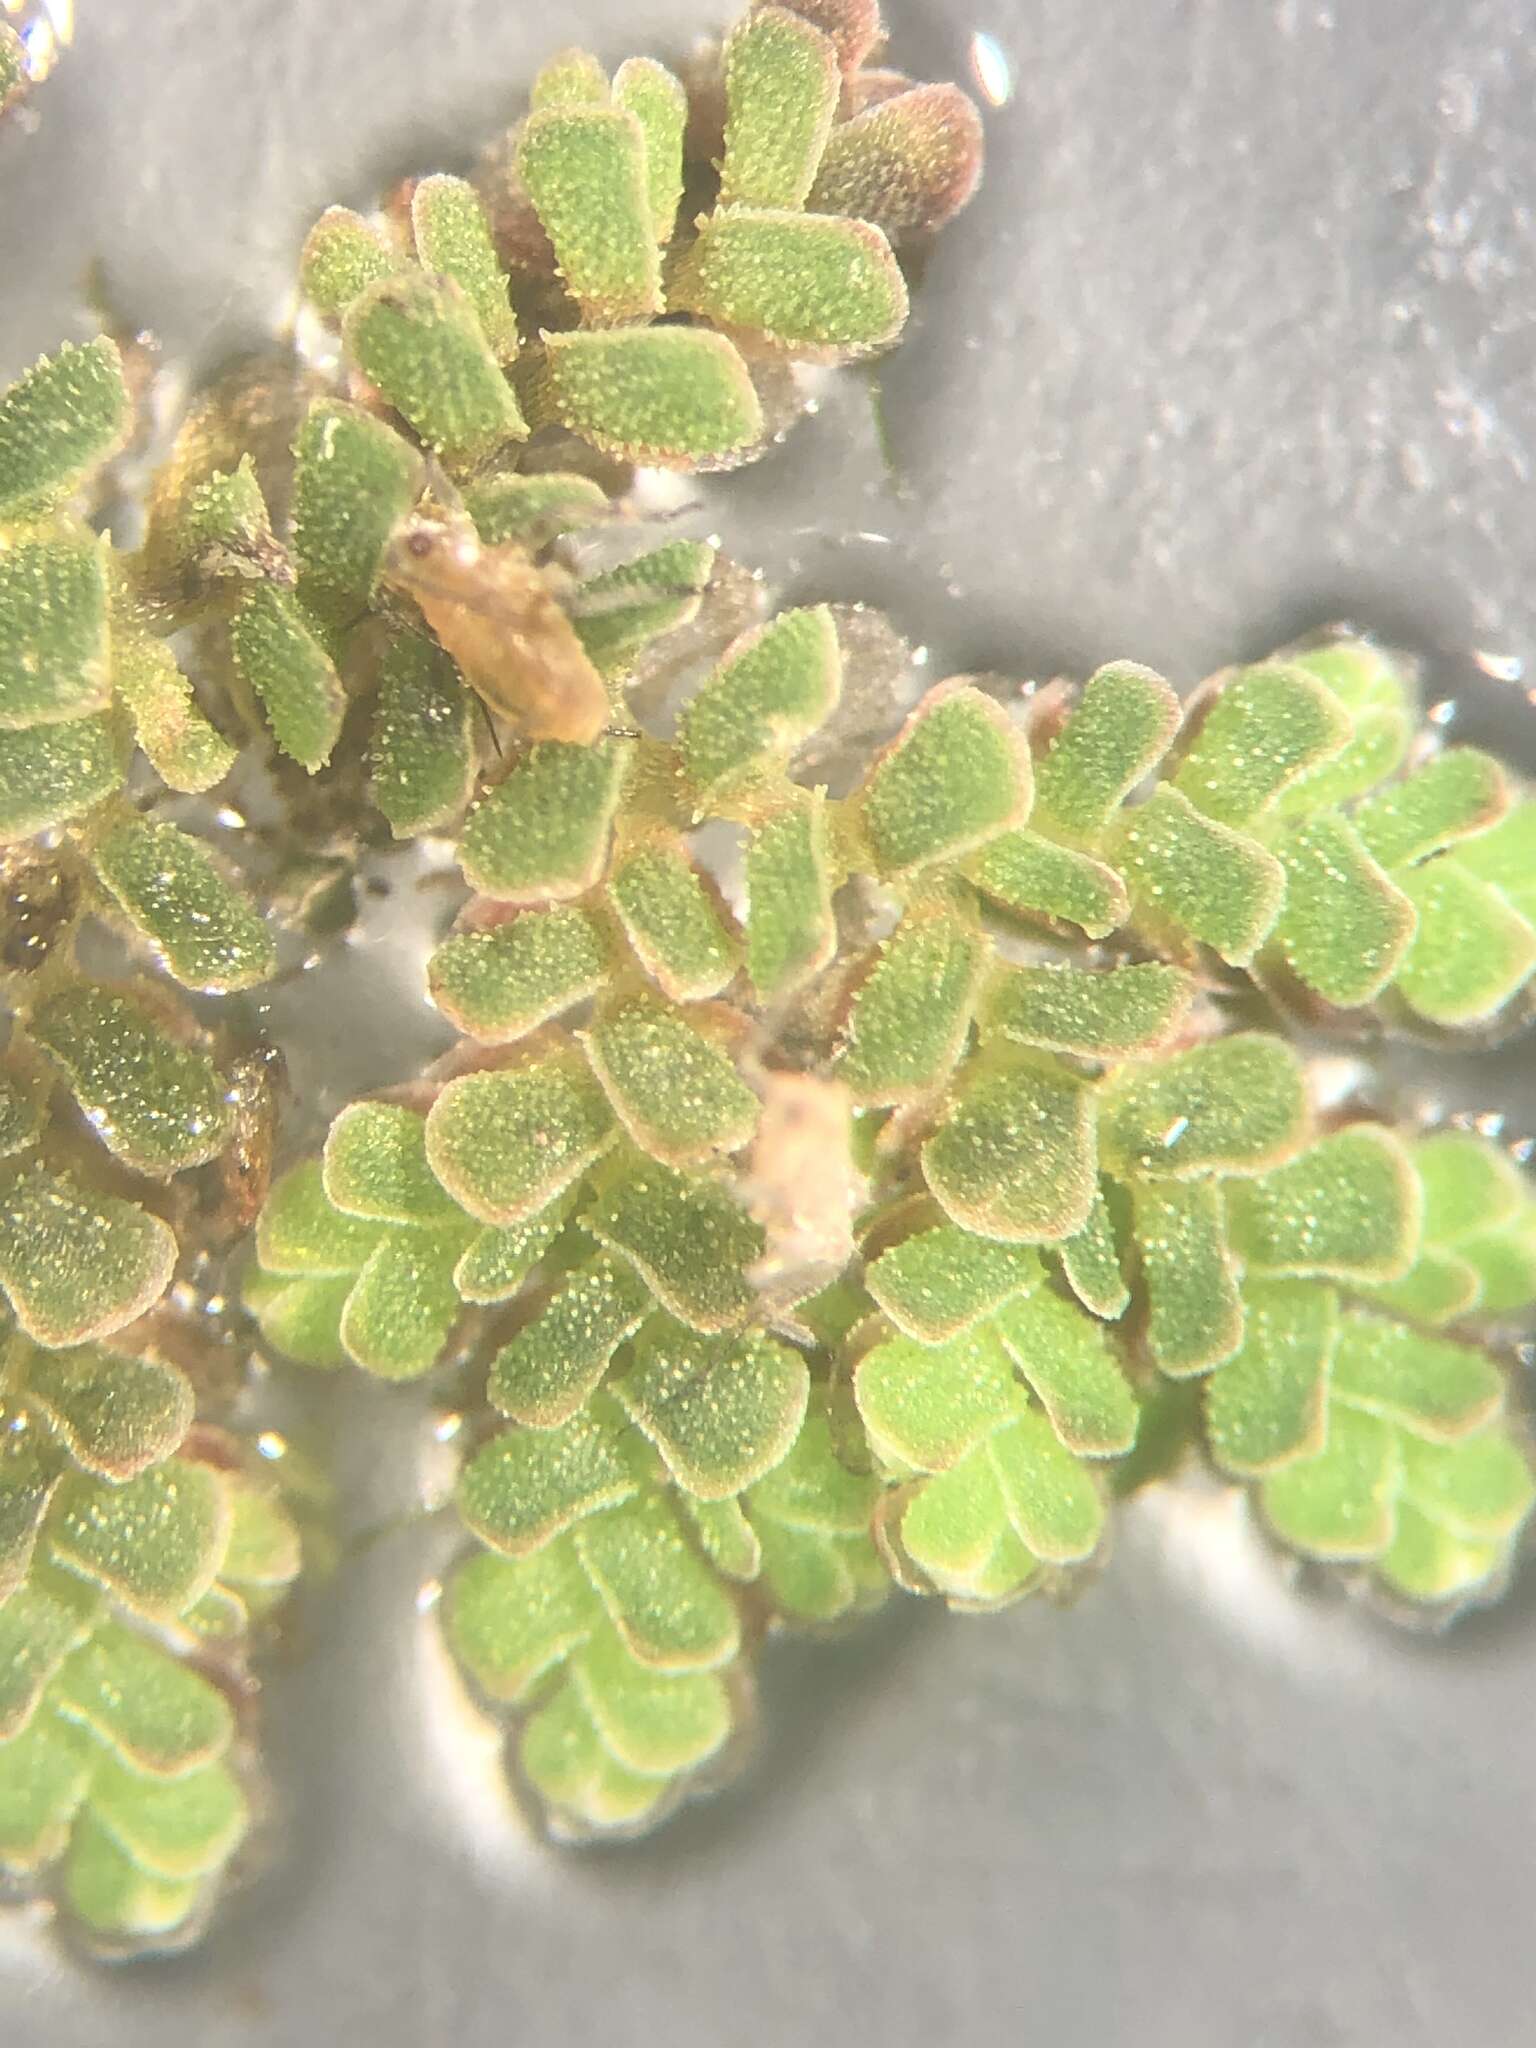 Image of Azolla filiculoides subsp. cristata (Kaulf.) Fraser-Jenk.